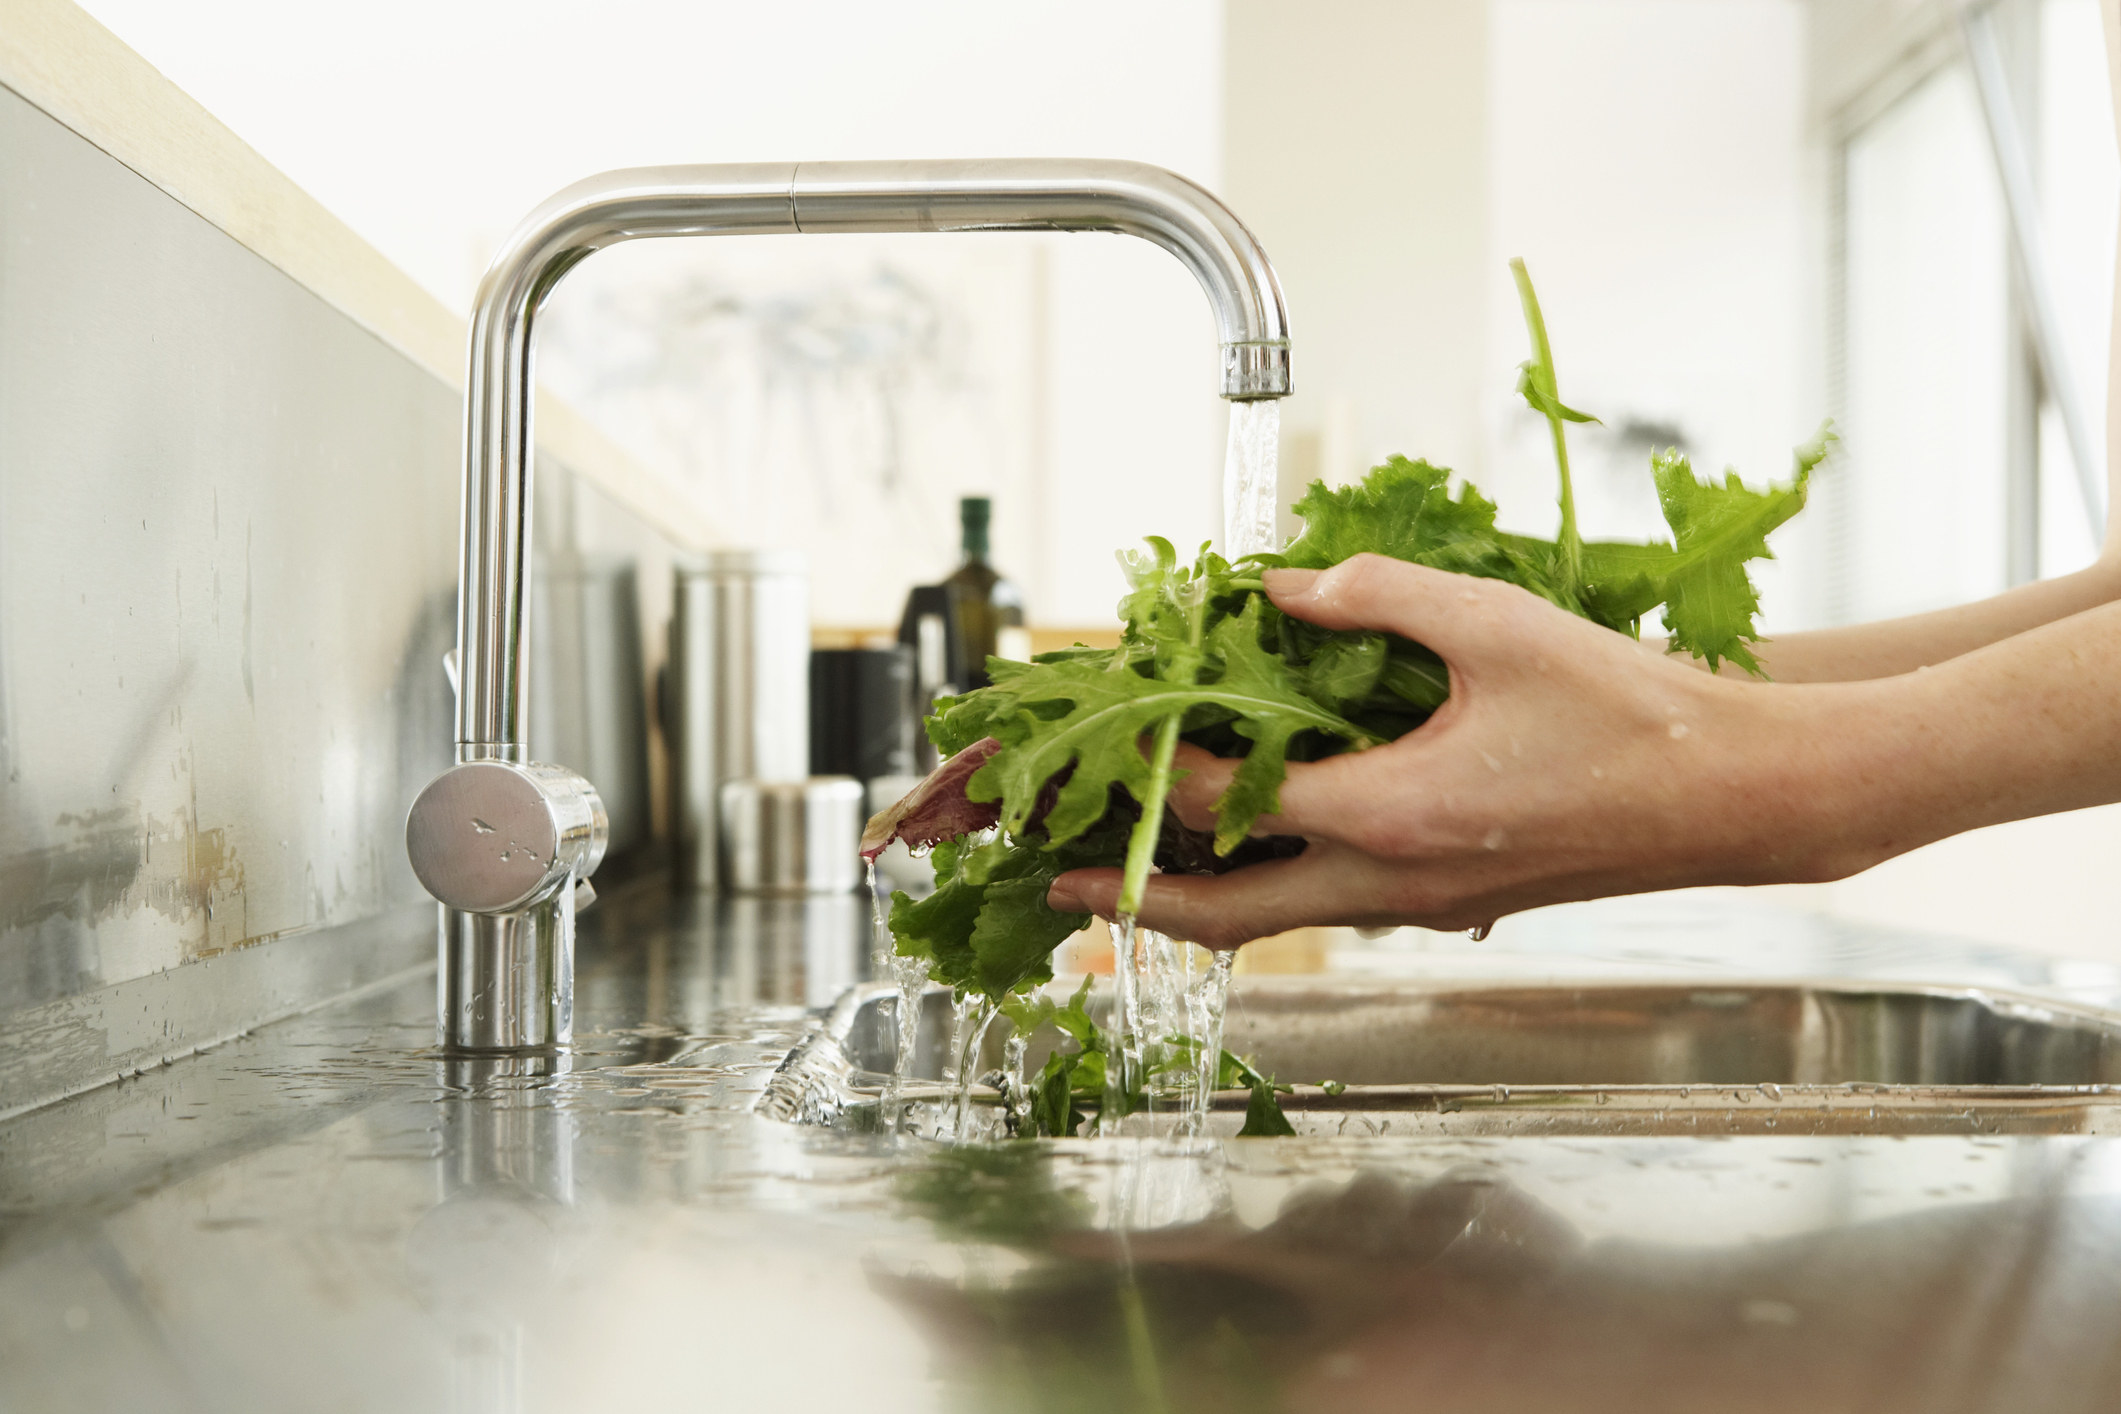 A woman washing lettuce in the sink.